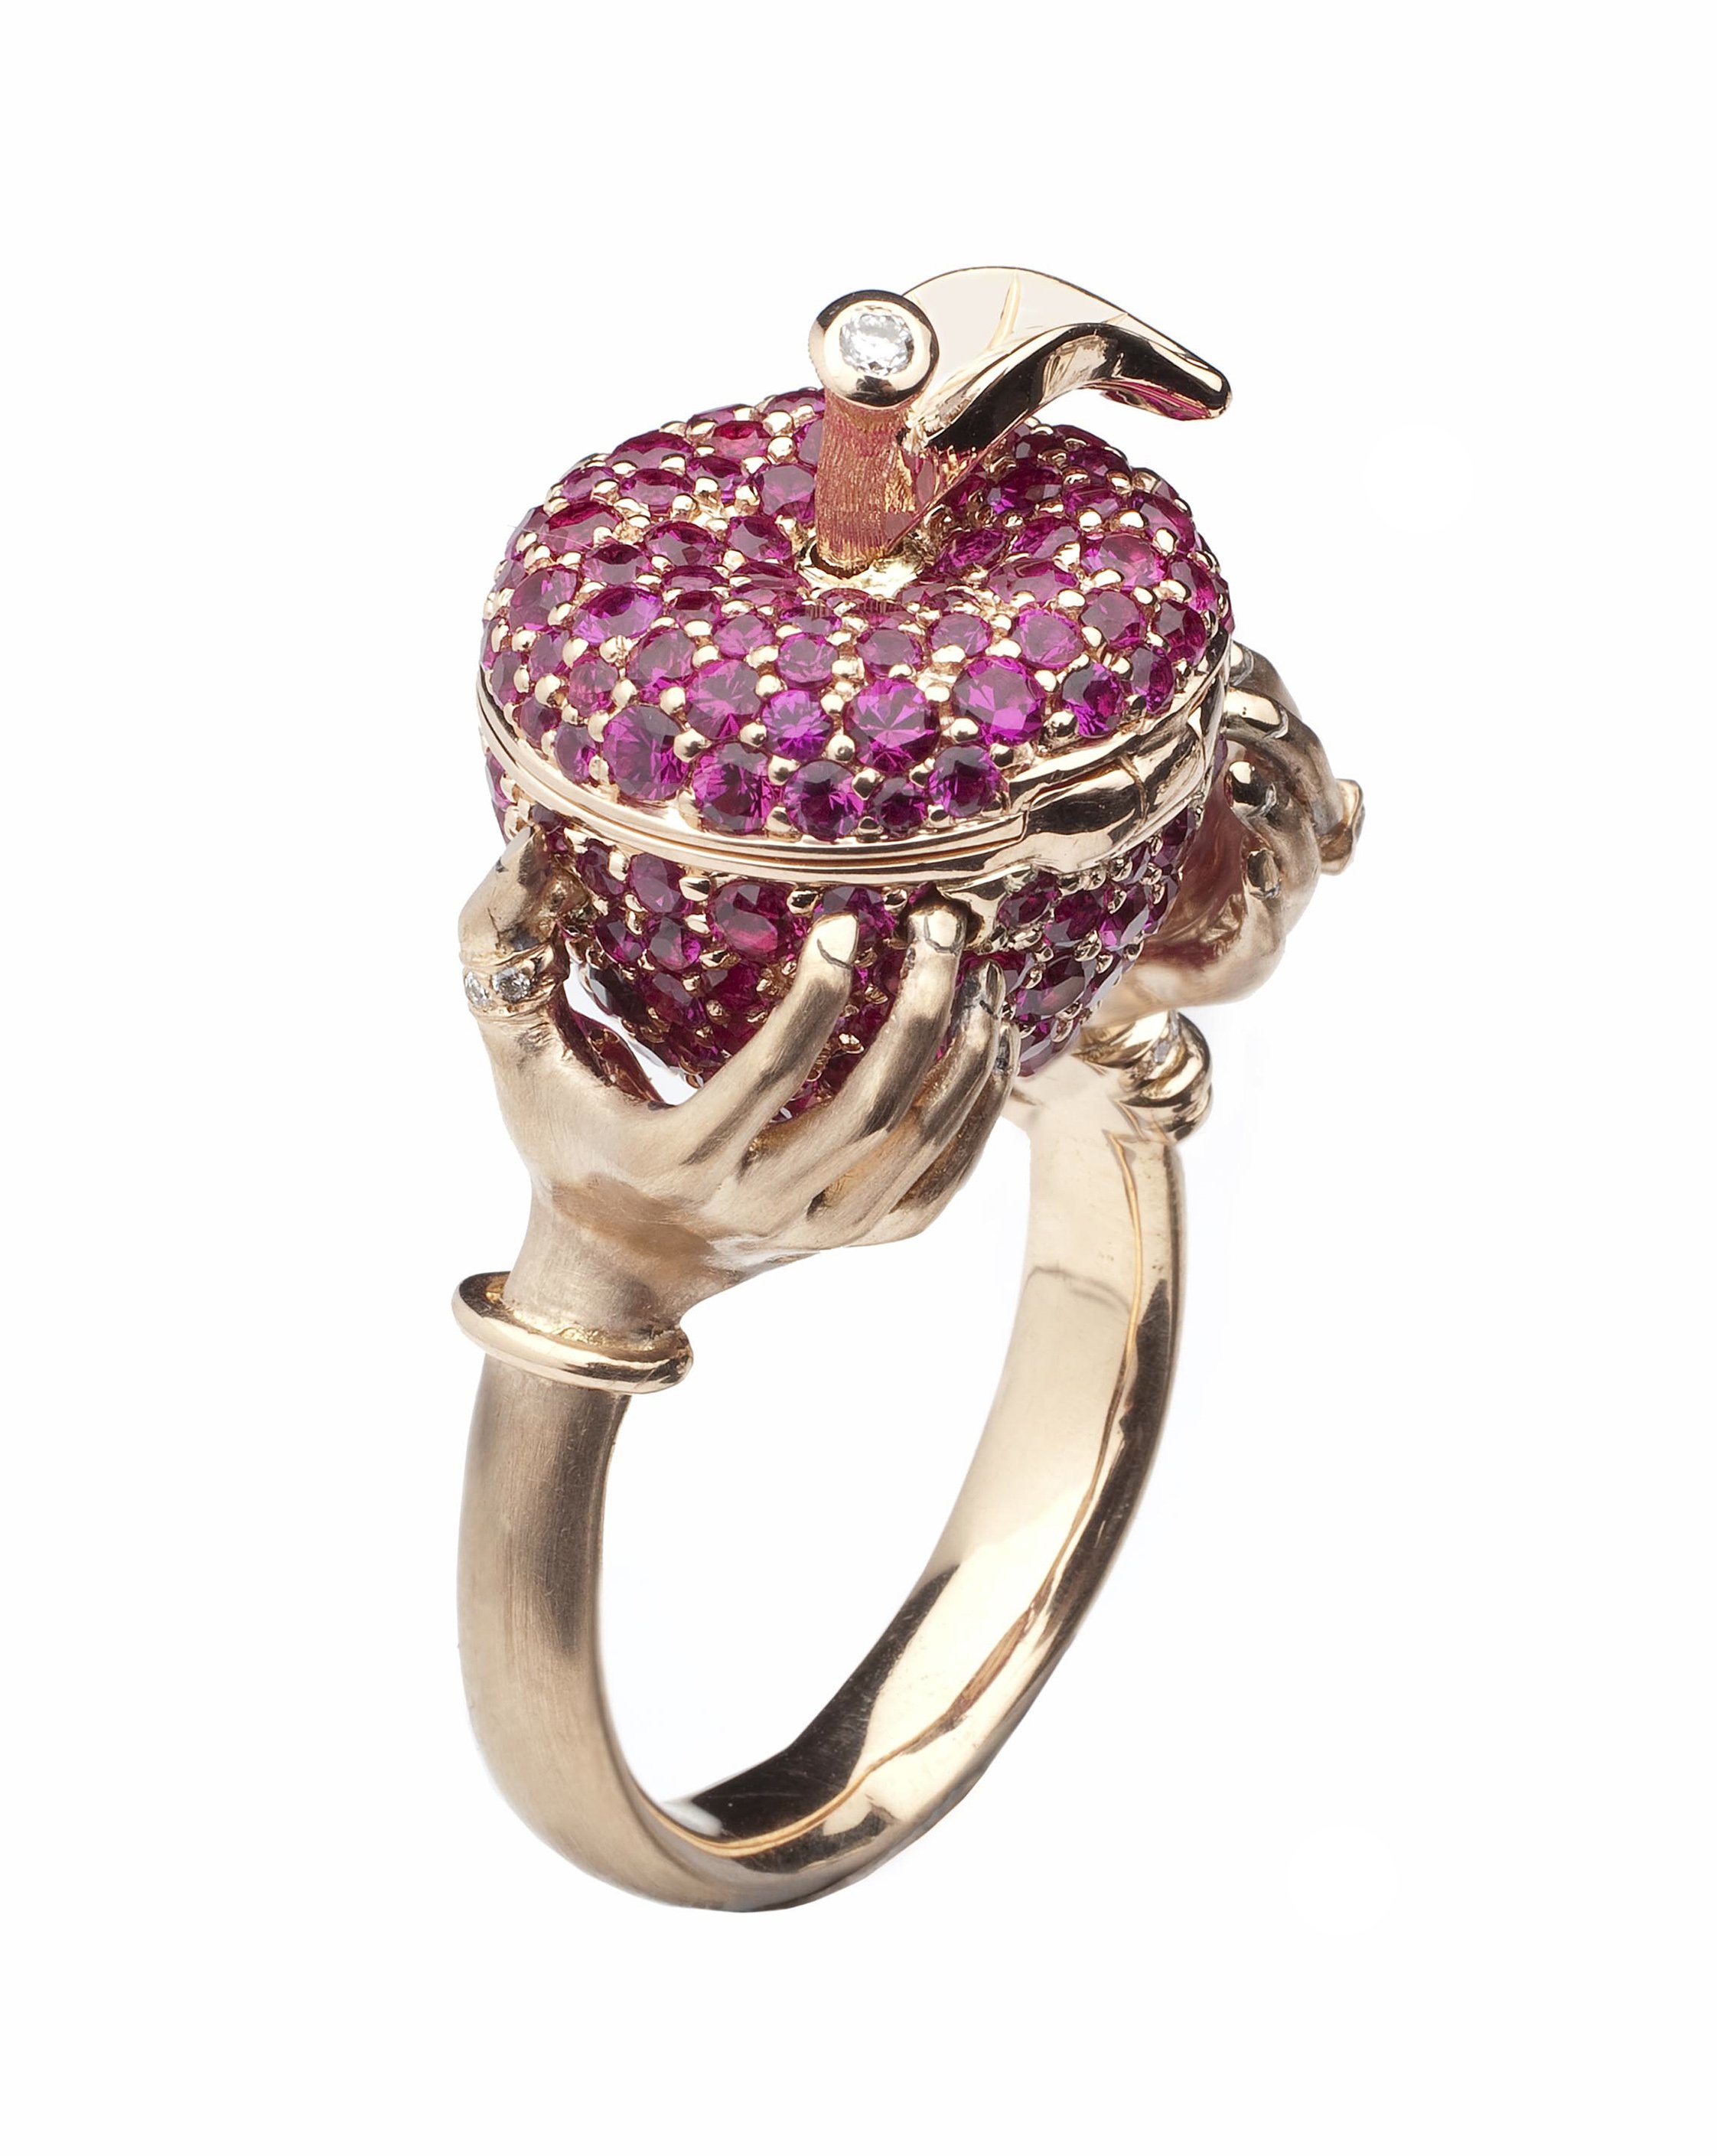 No Regrets Murder She Wrote Large Poison Apple Ring with Ruby in 18kt Rose Gold - Size 6.5